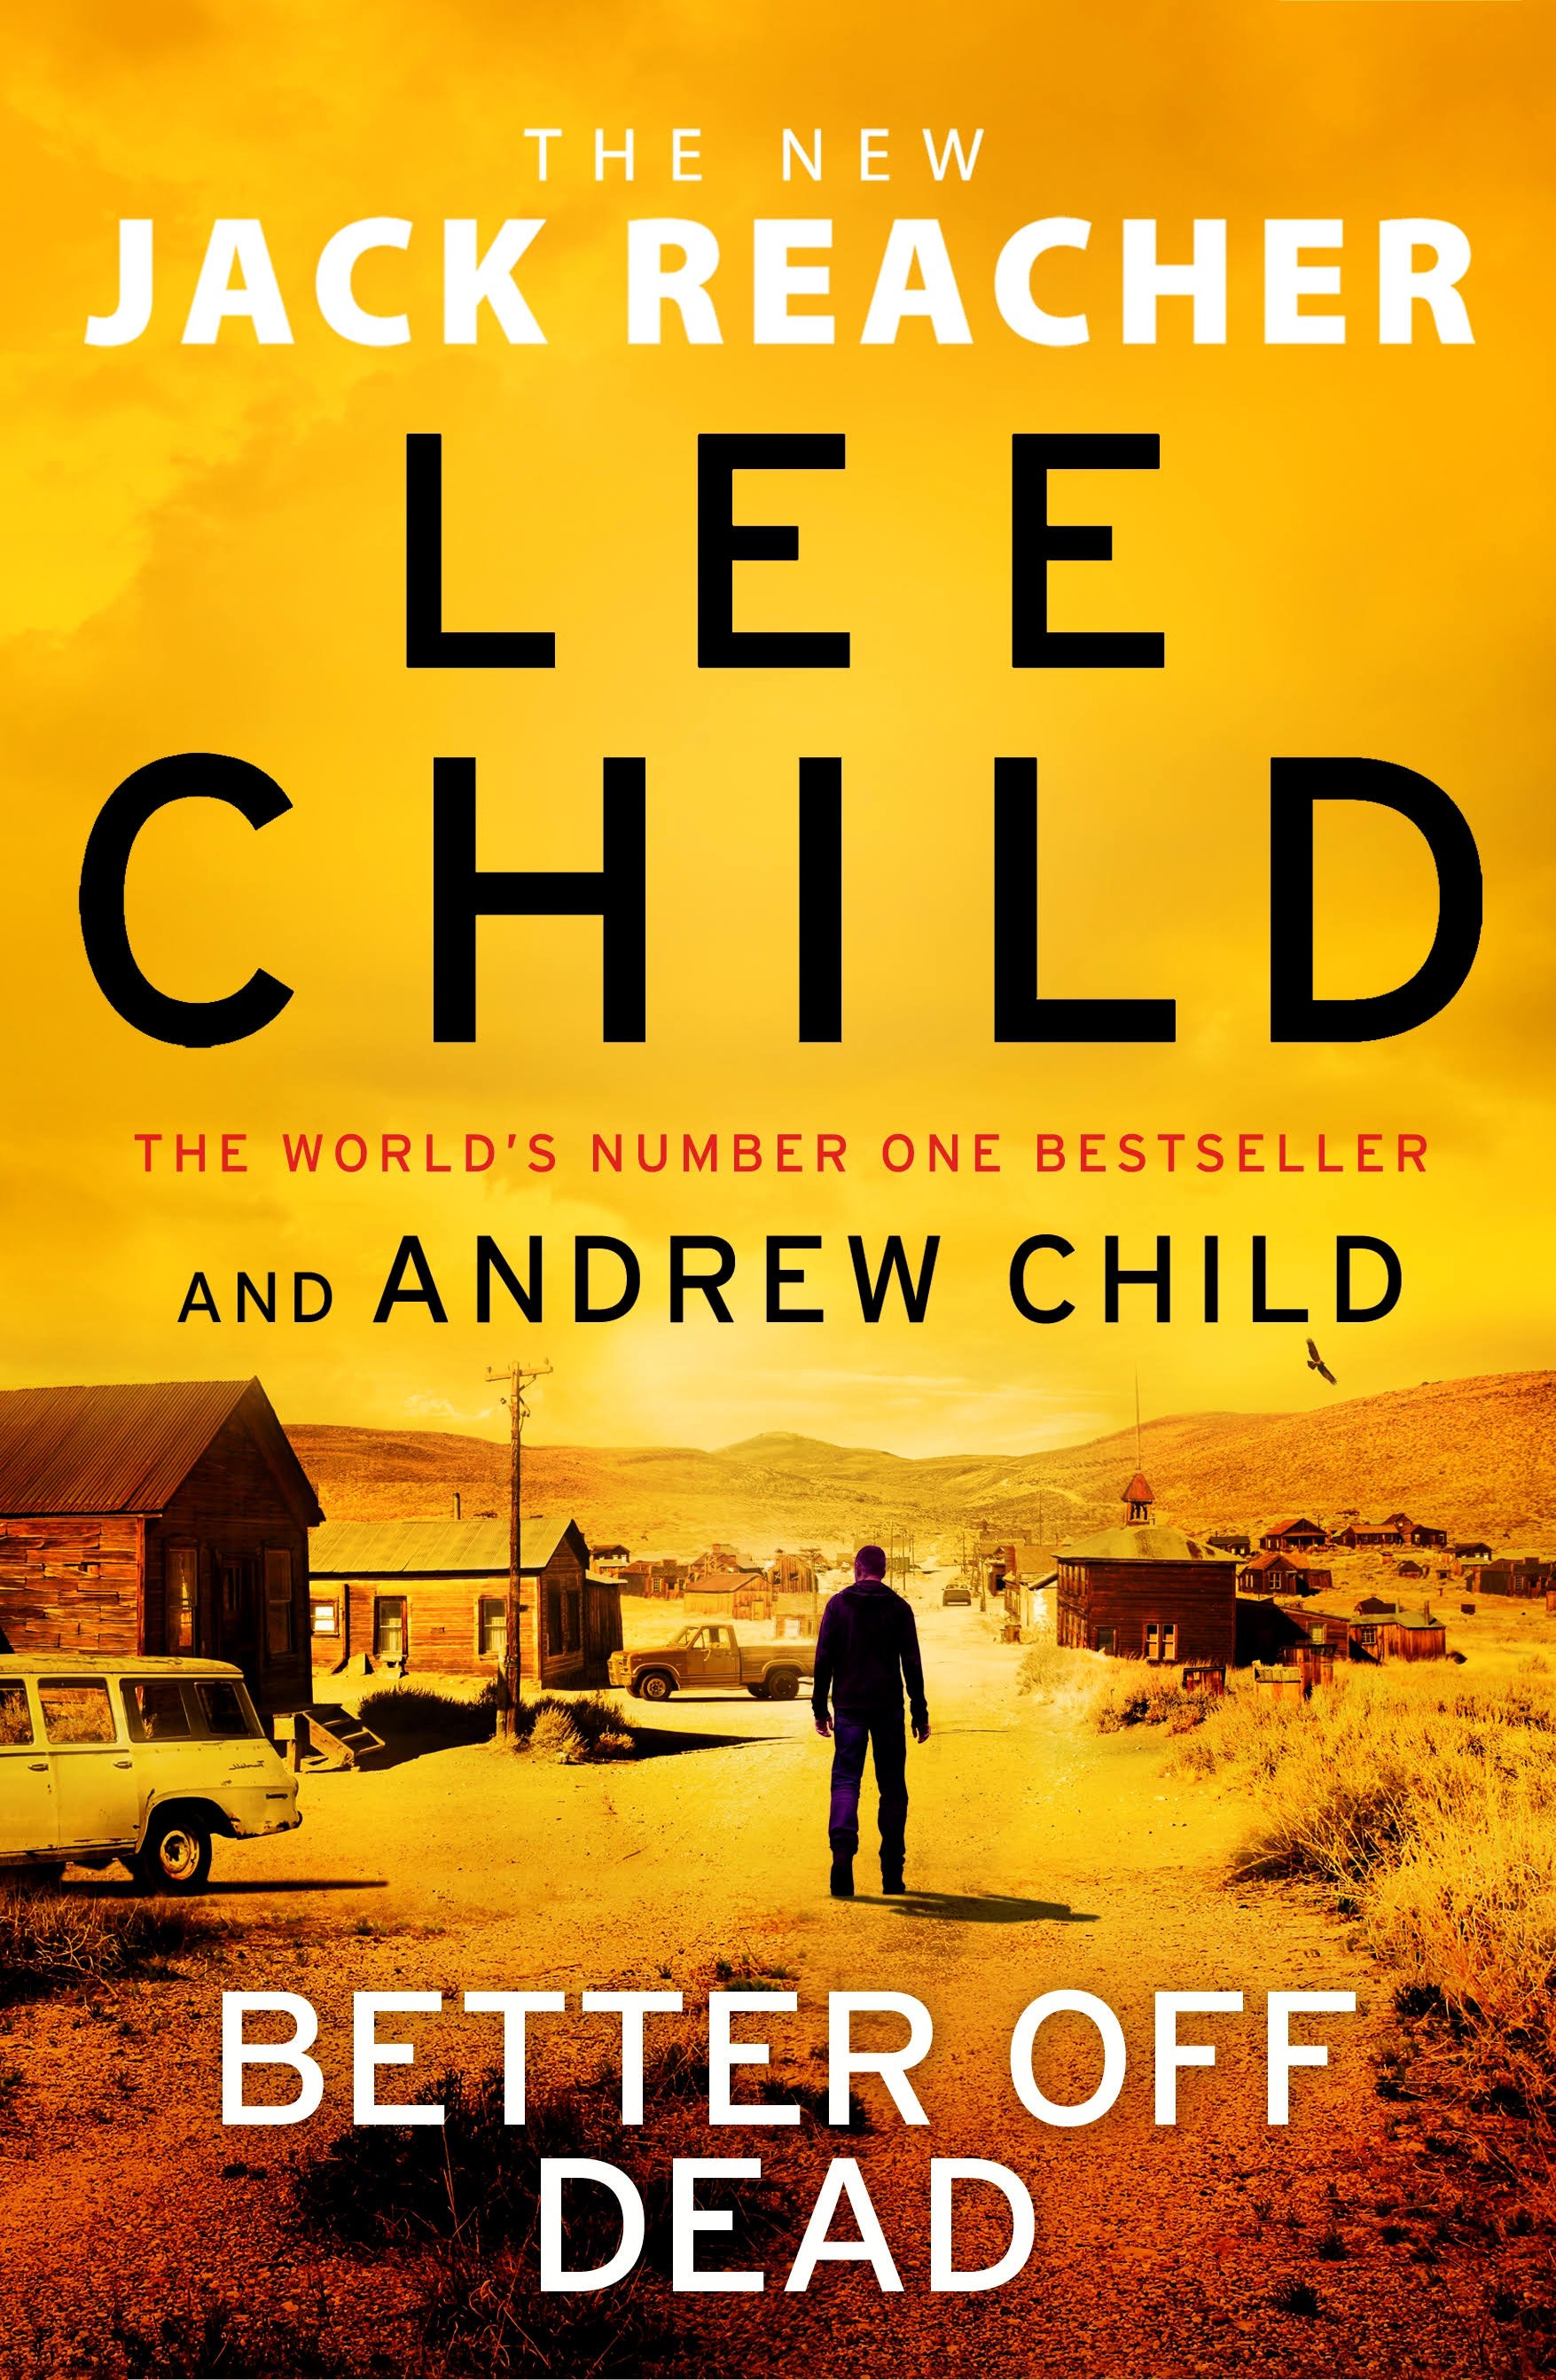 Better Off Dead by Lee Child